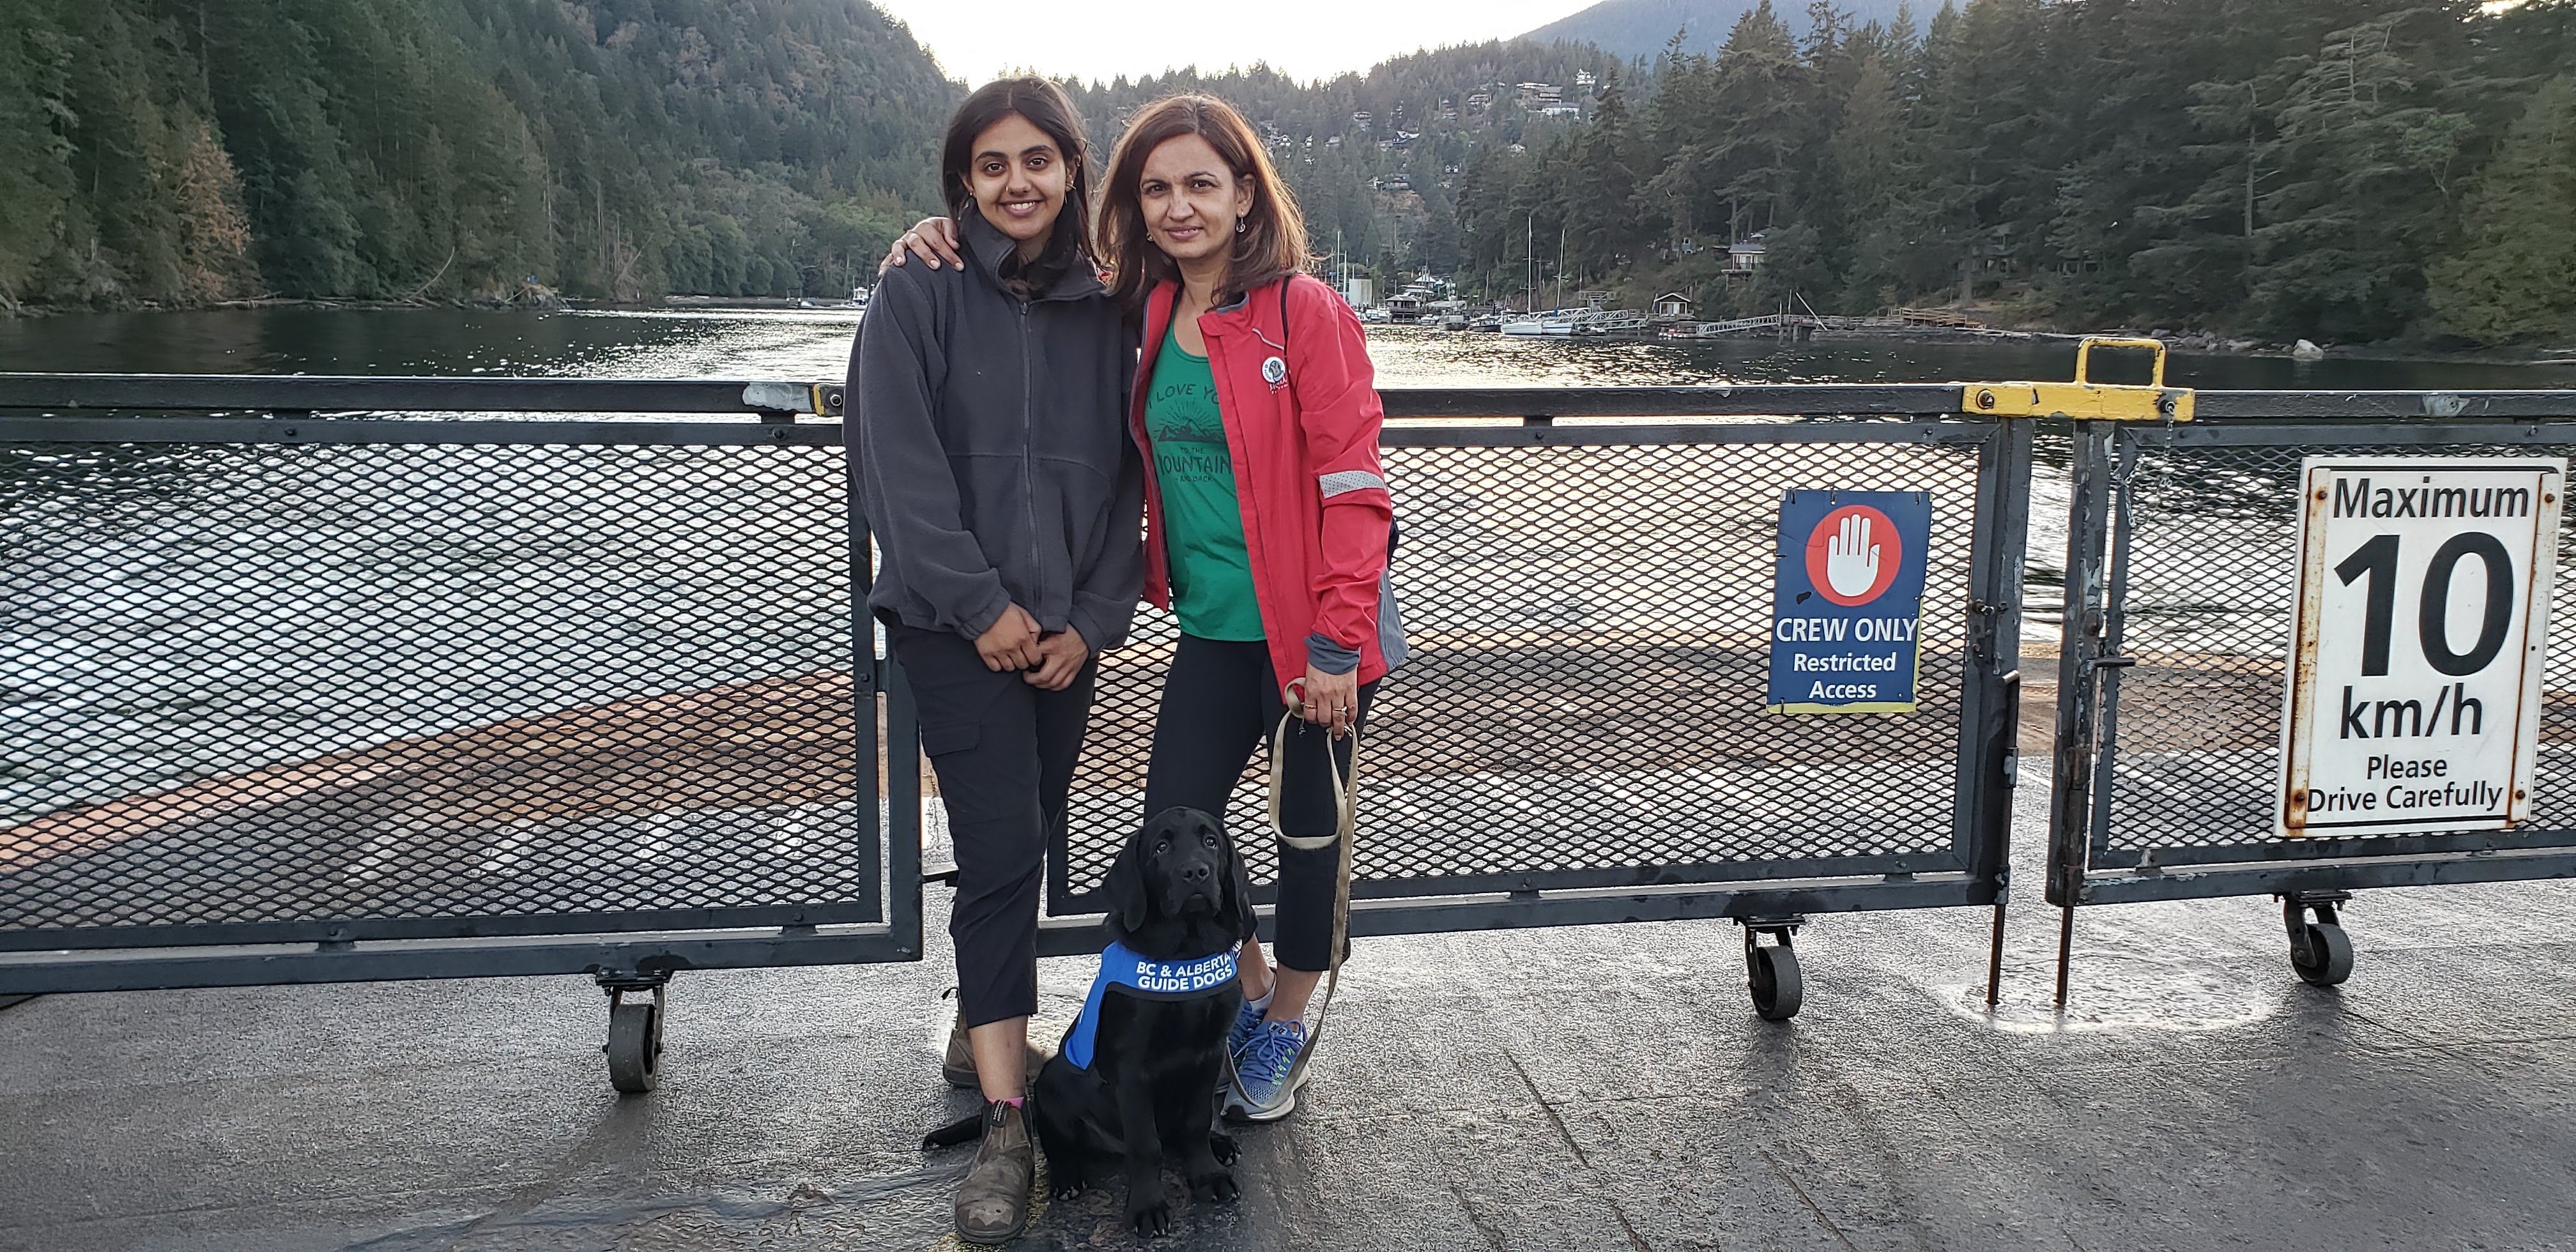 The mother-daughter duo, Jessie (on the right) and Sehaj (on the left) with Daniel on a ferry in B.C.